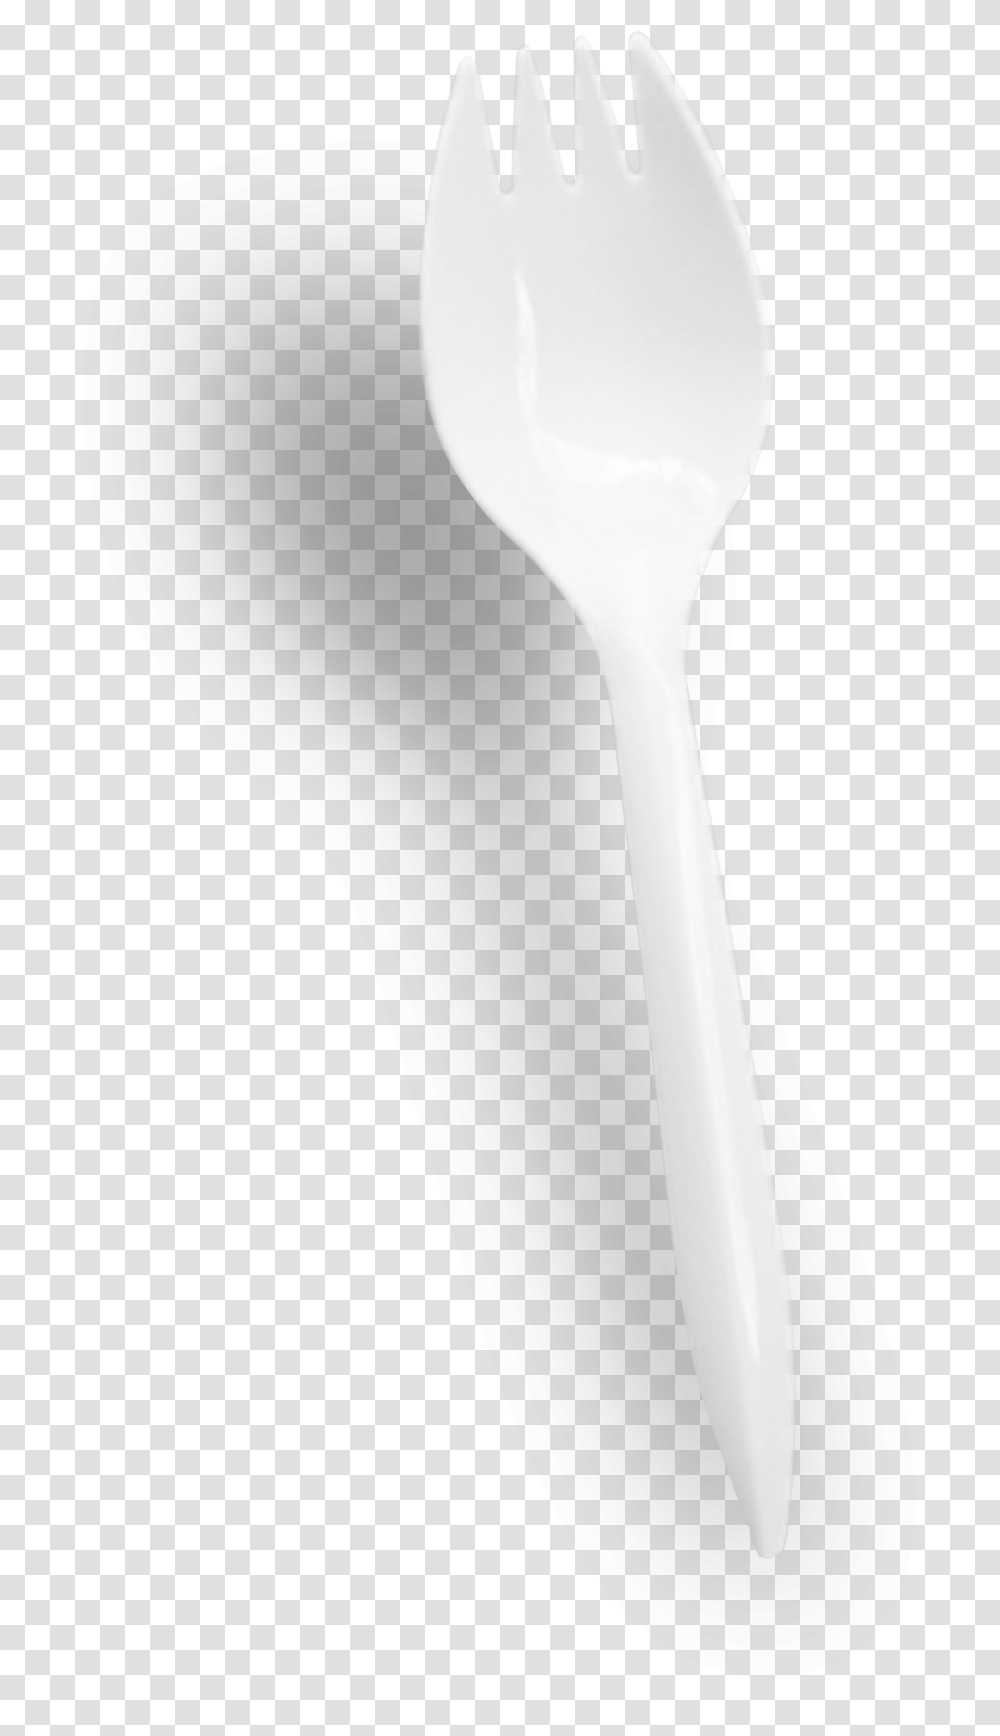 Still Life Photography, Cutlery, Fork, Spoon Transparent Png